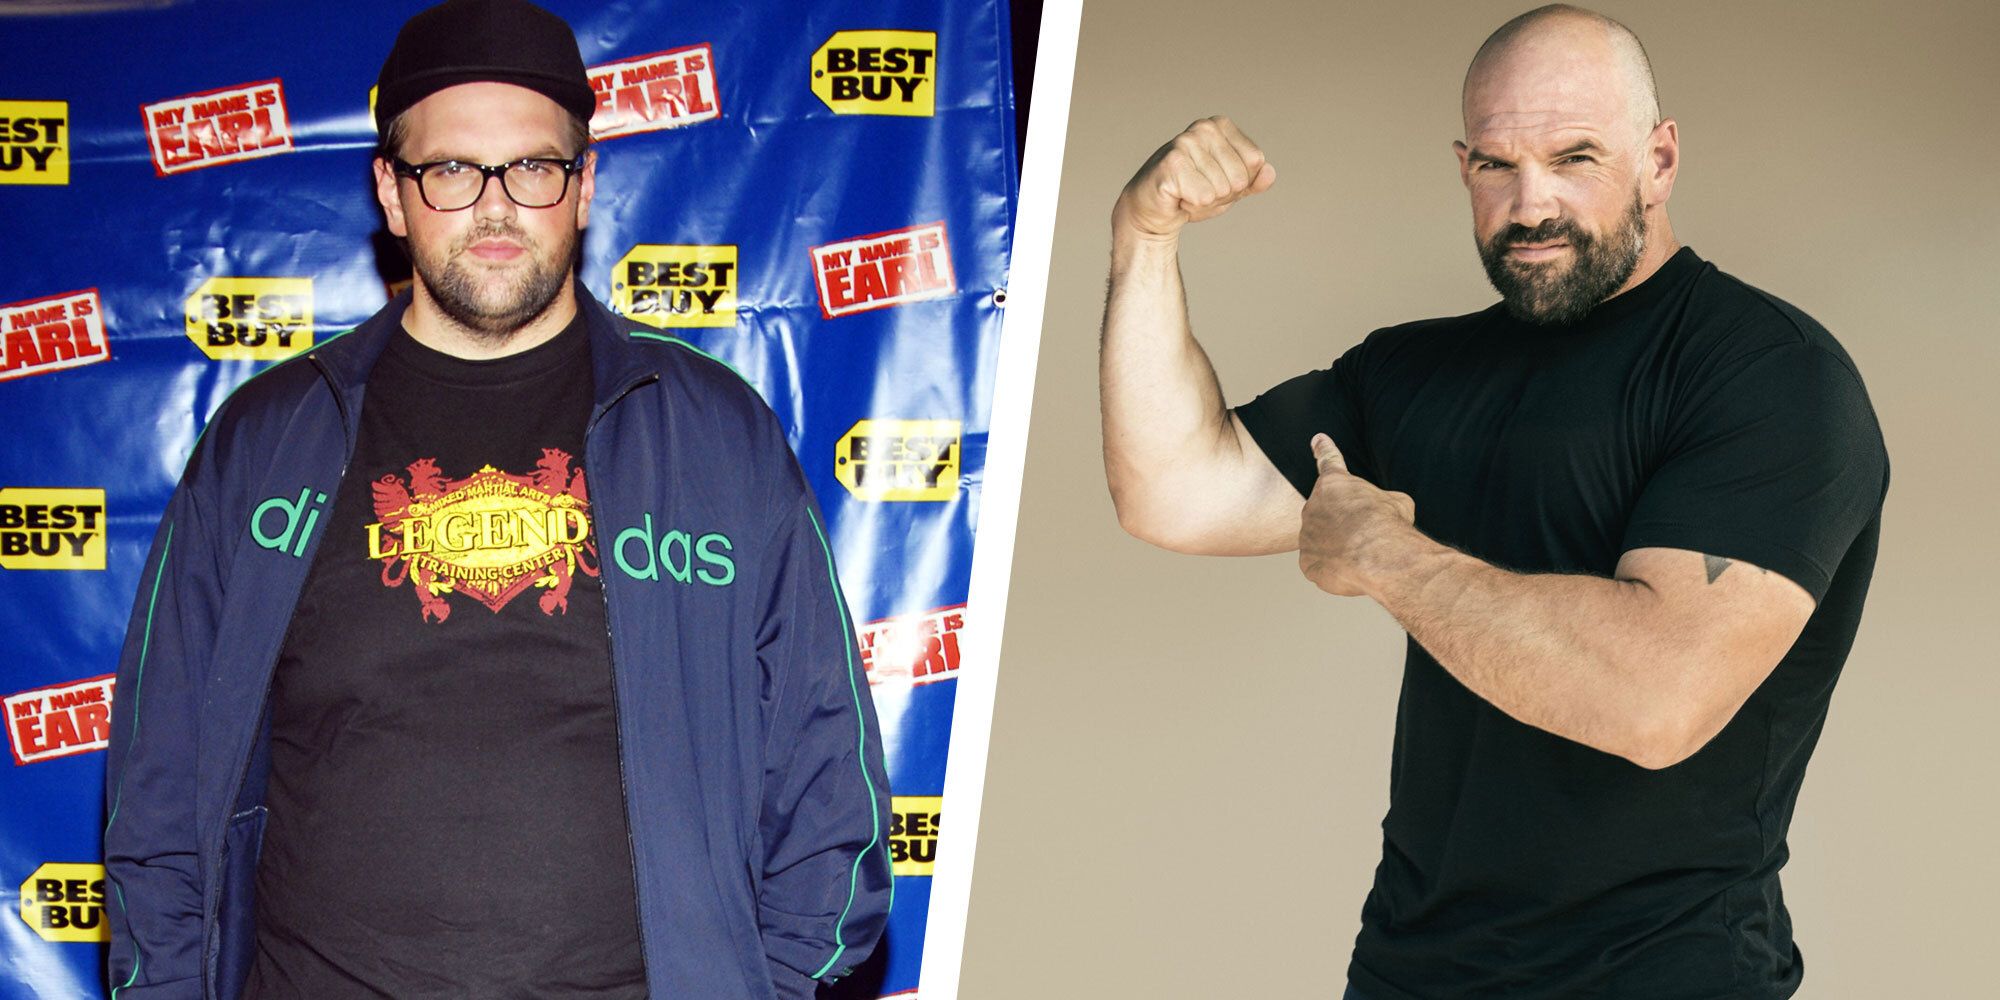 Actor Ethan Suplee 200-Pound Weight Loss